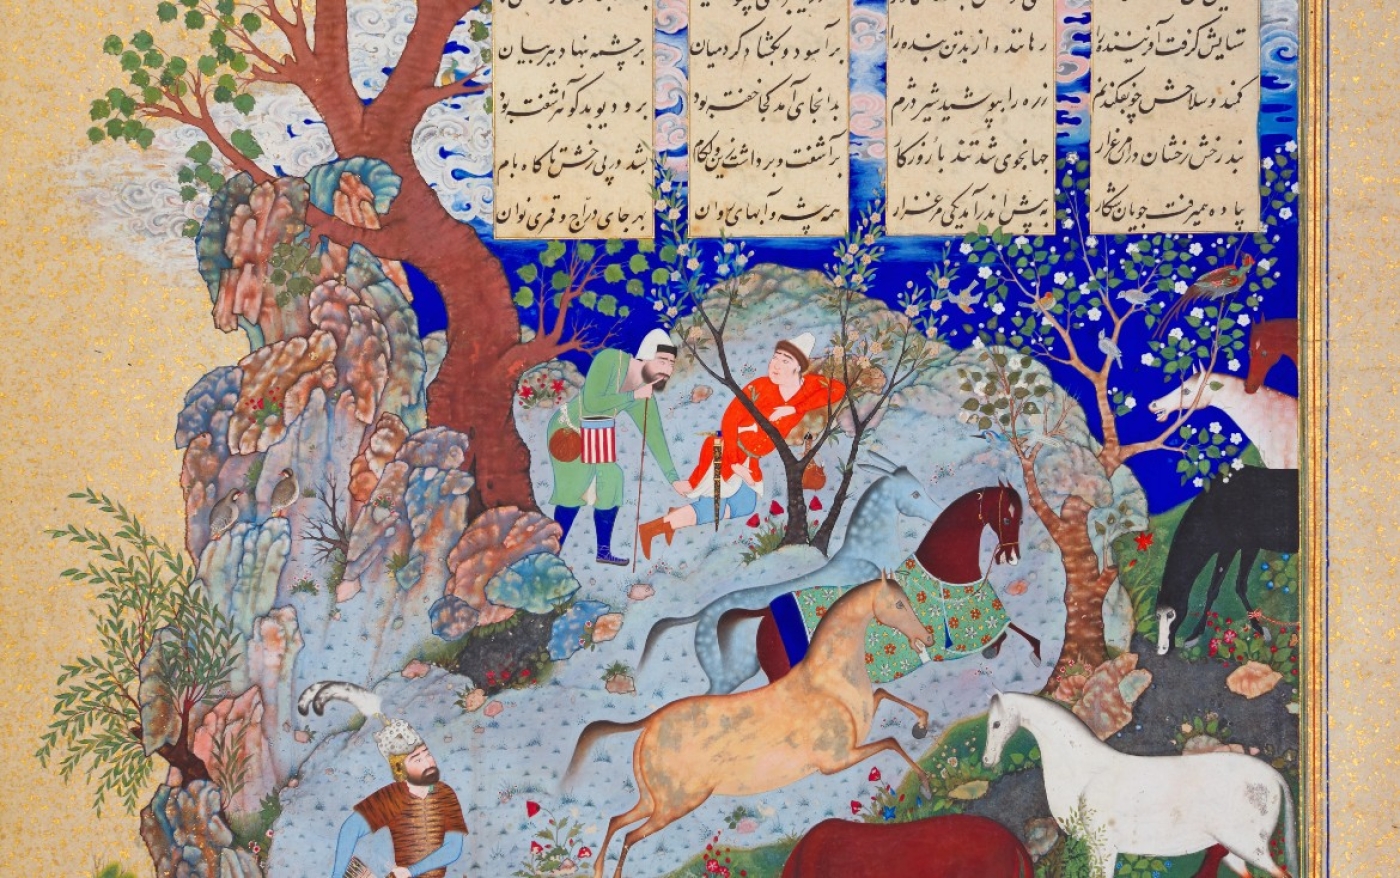 The manuscript is considered to be a significant part of Iranian national identity and is regarded as one of the most important works of art globally (Supplied/Courtesy of Sotheby’s)